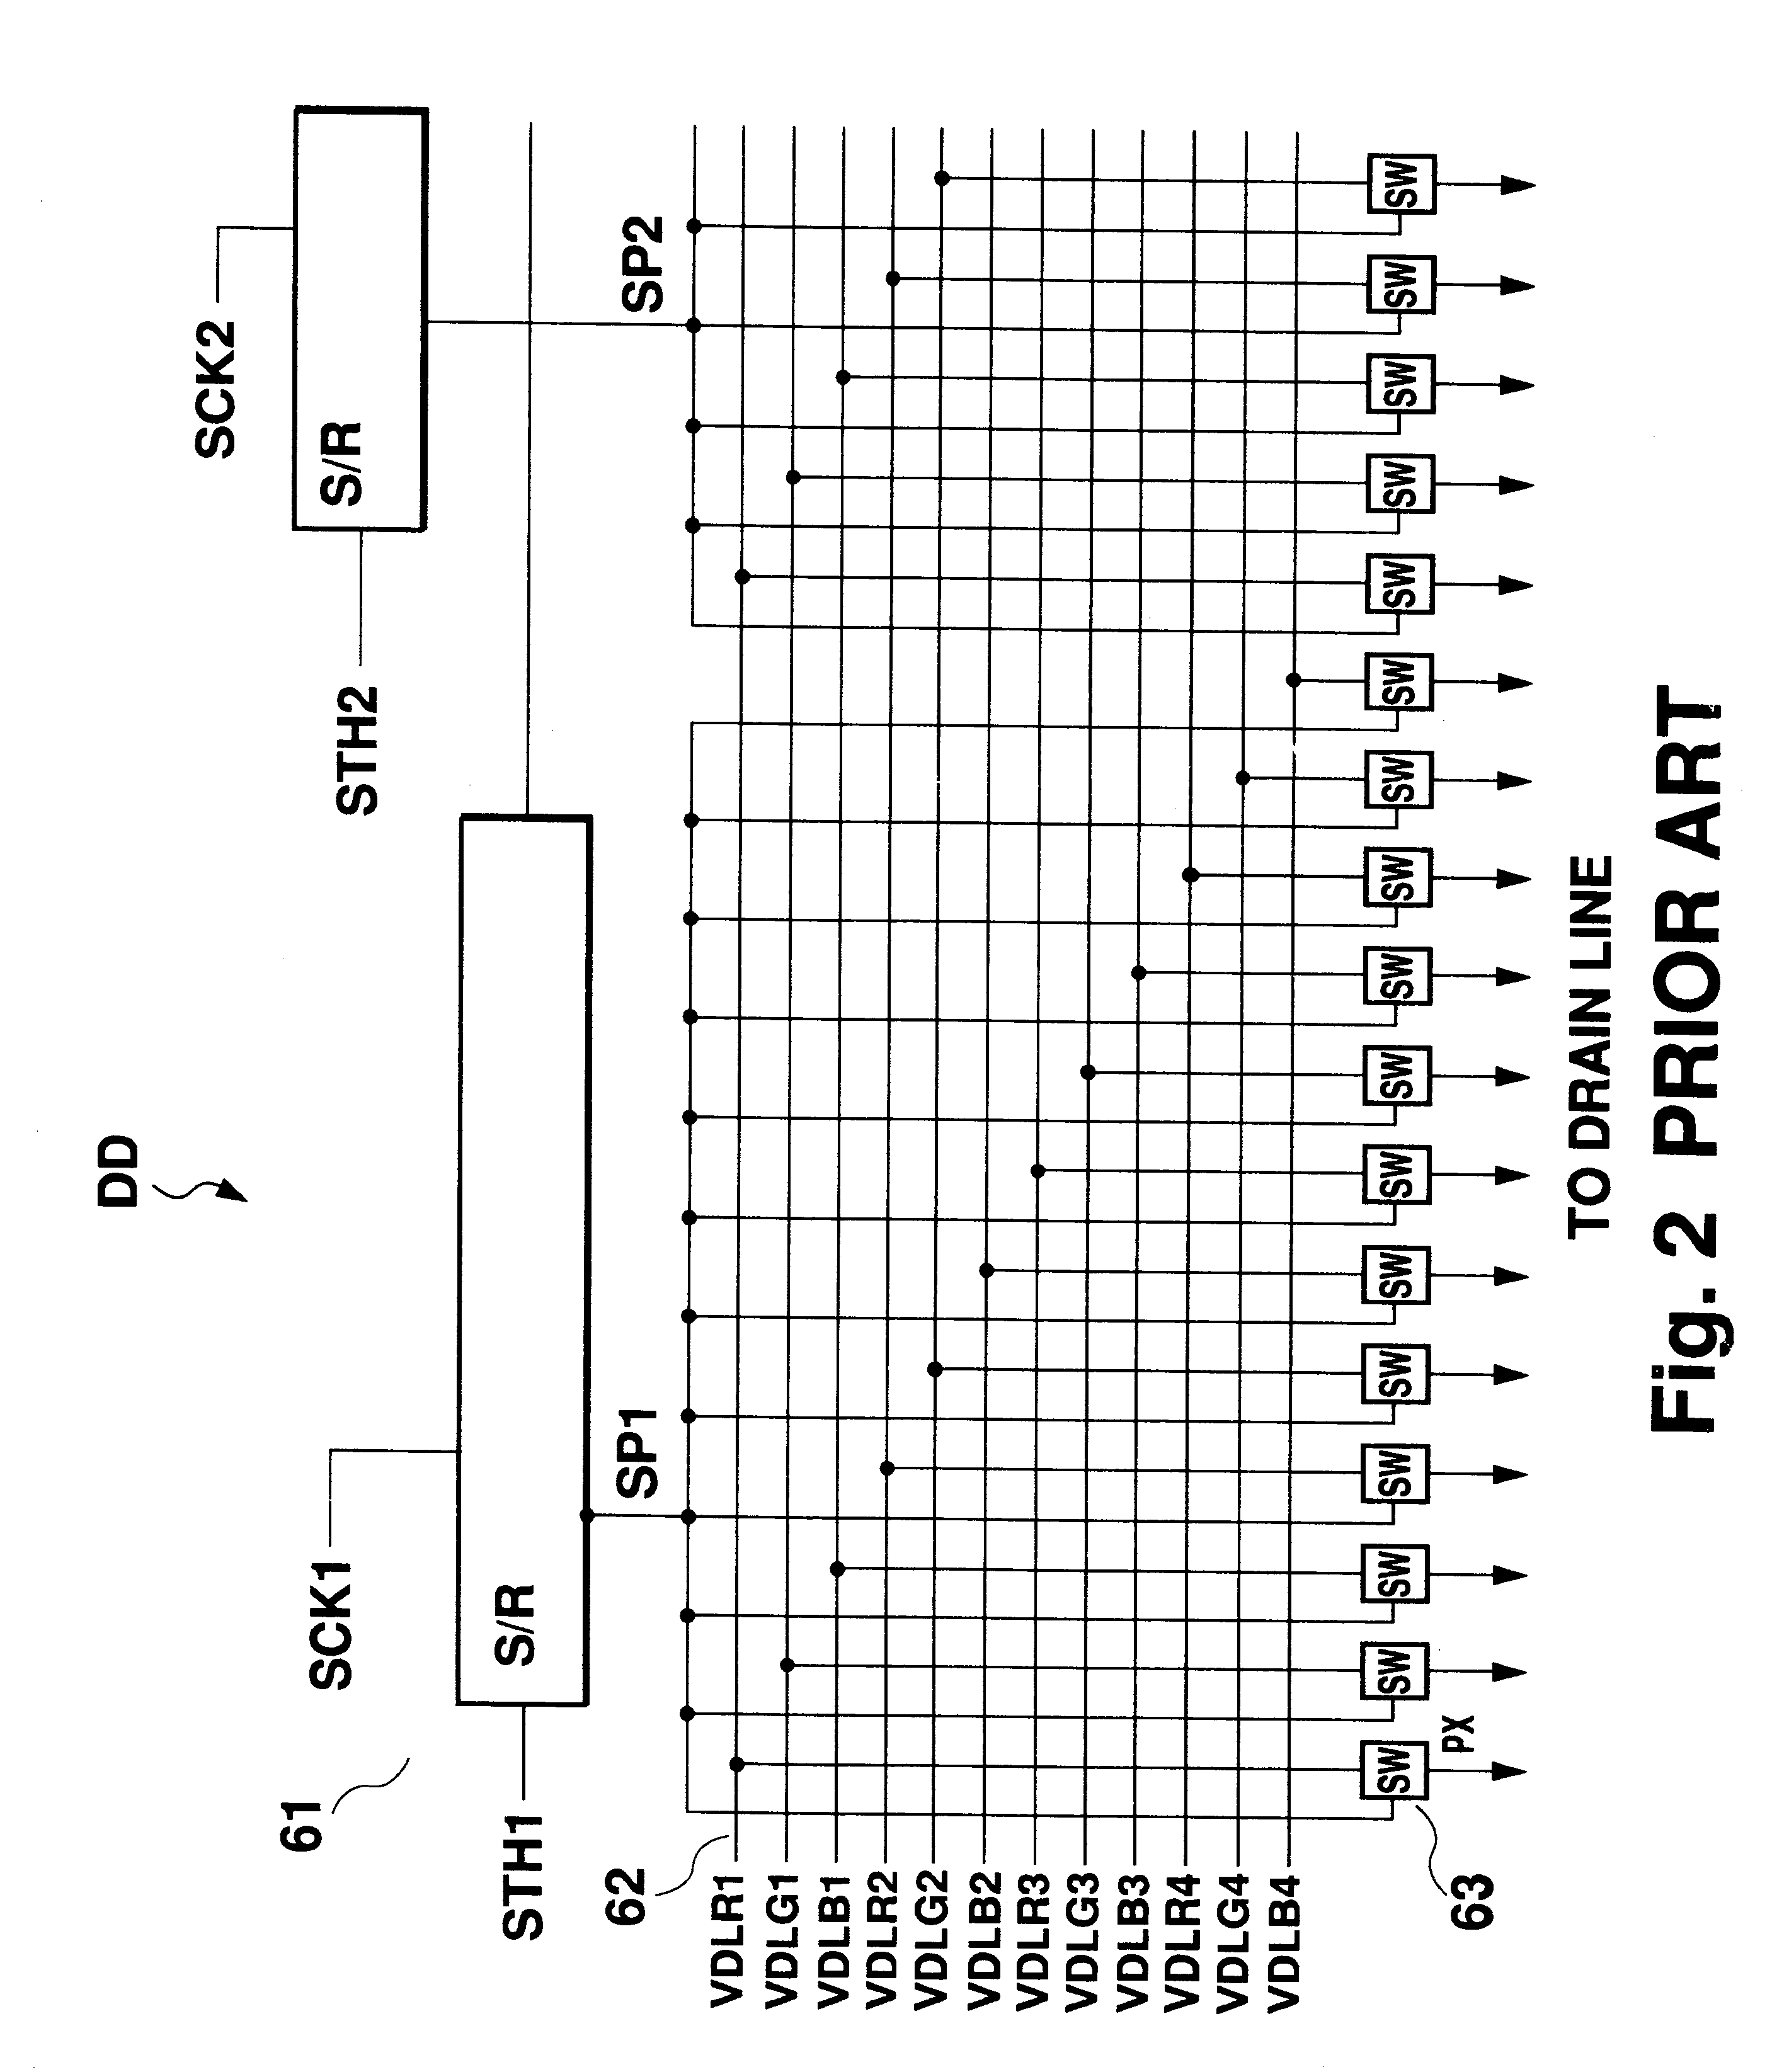 Driving circuit for display device